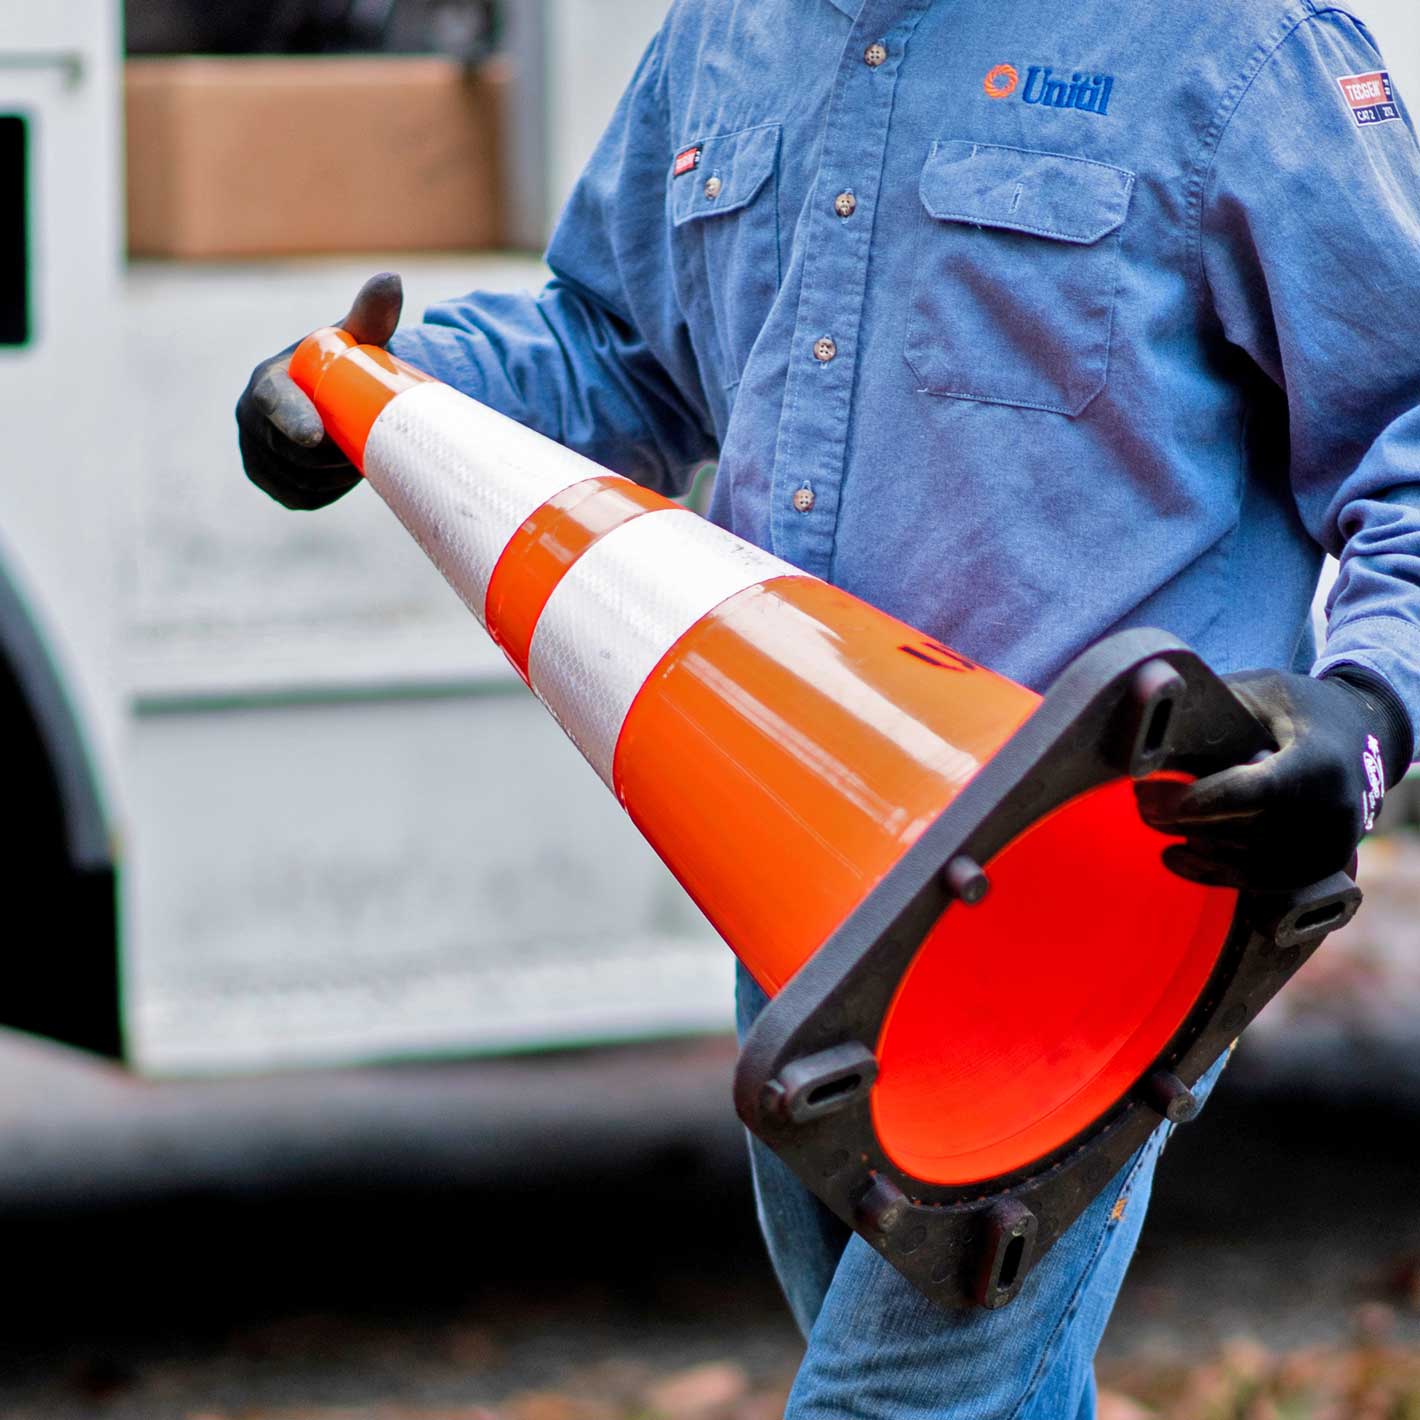 A Unitil employee placing a safety cone at a work site.